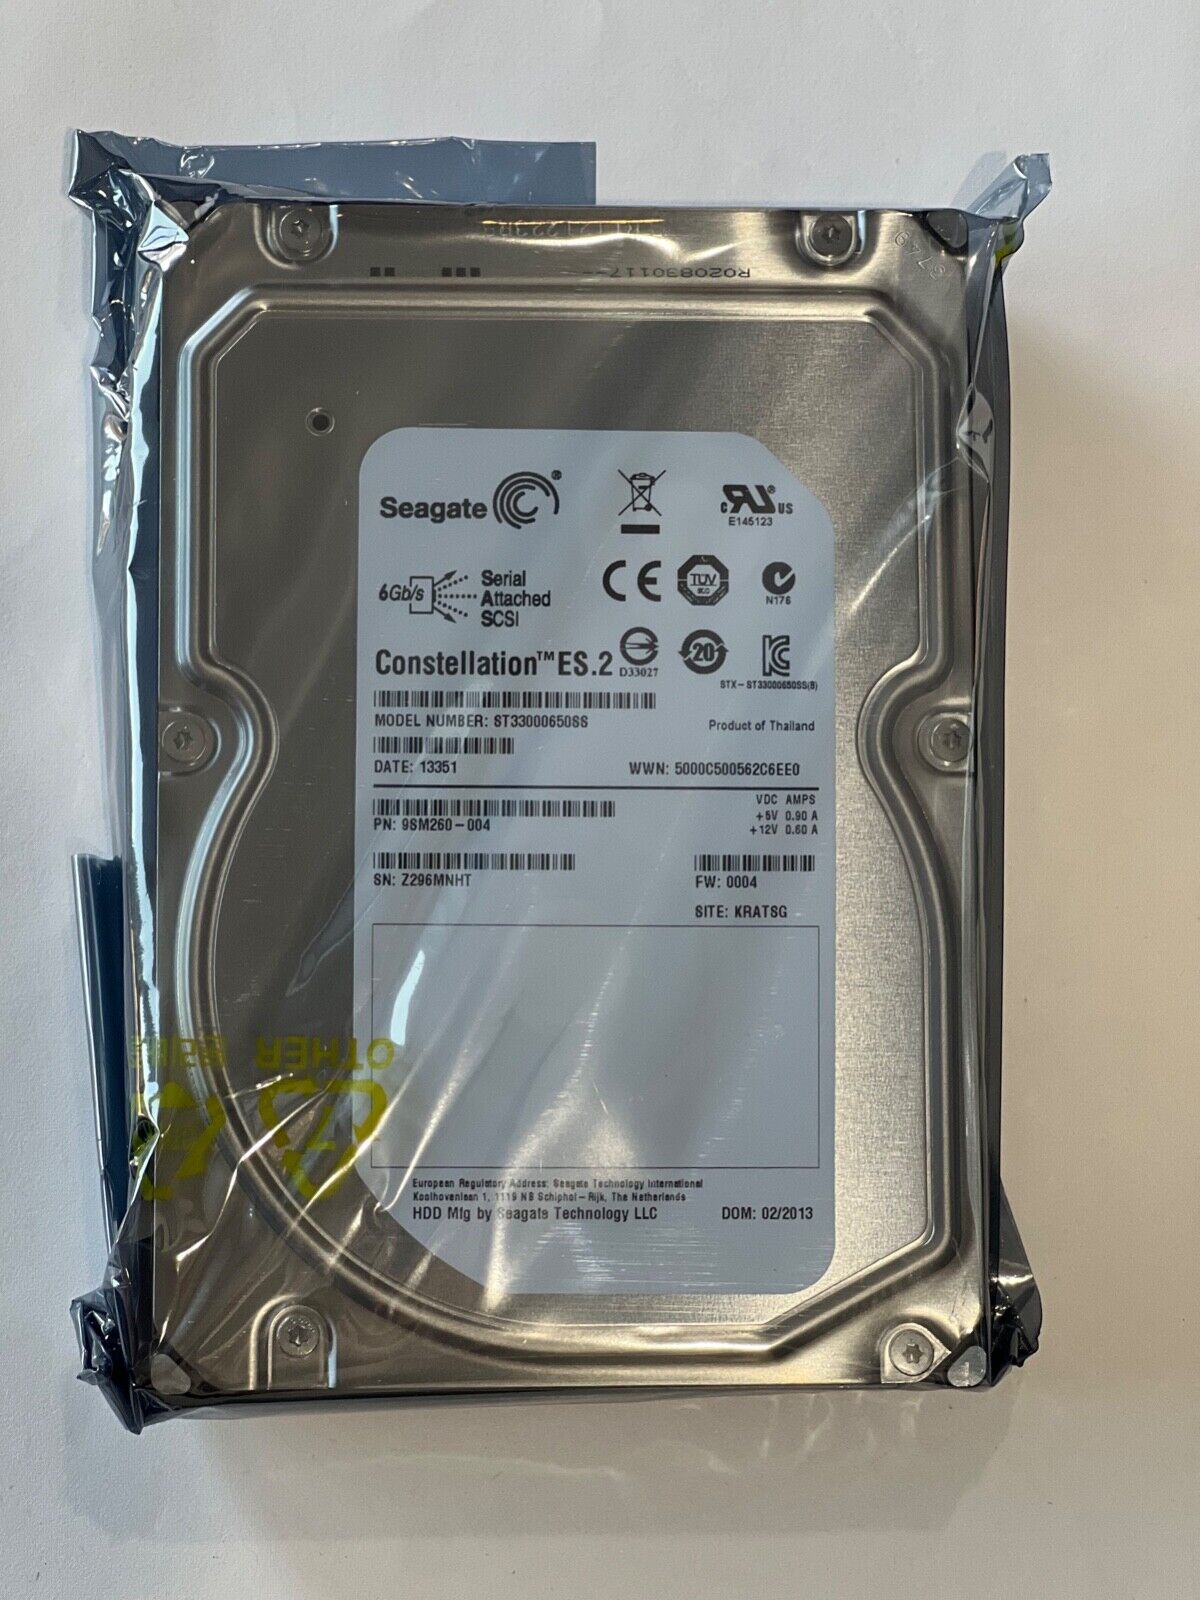 SEAGATE CONSTELLATION ST33000650SS HDD 3TB 7200RPM 3.5 INCH  SAS HARD DISK DRIVE